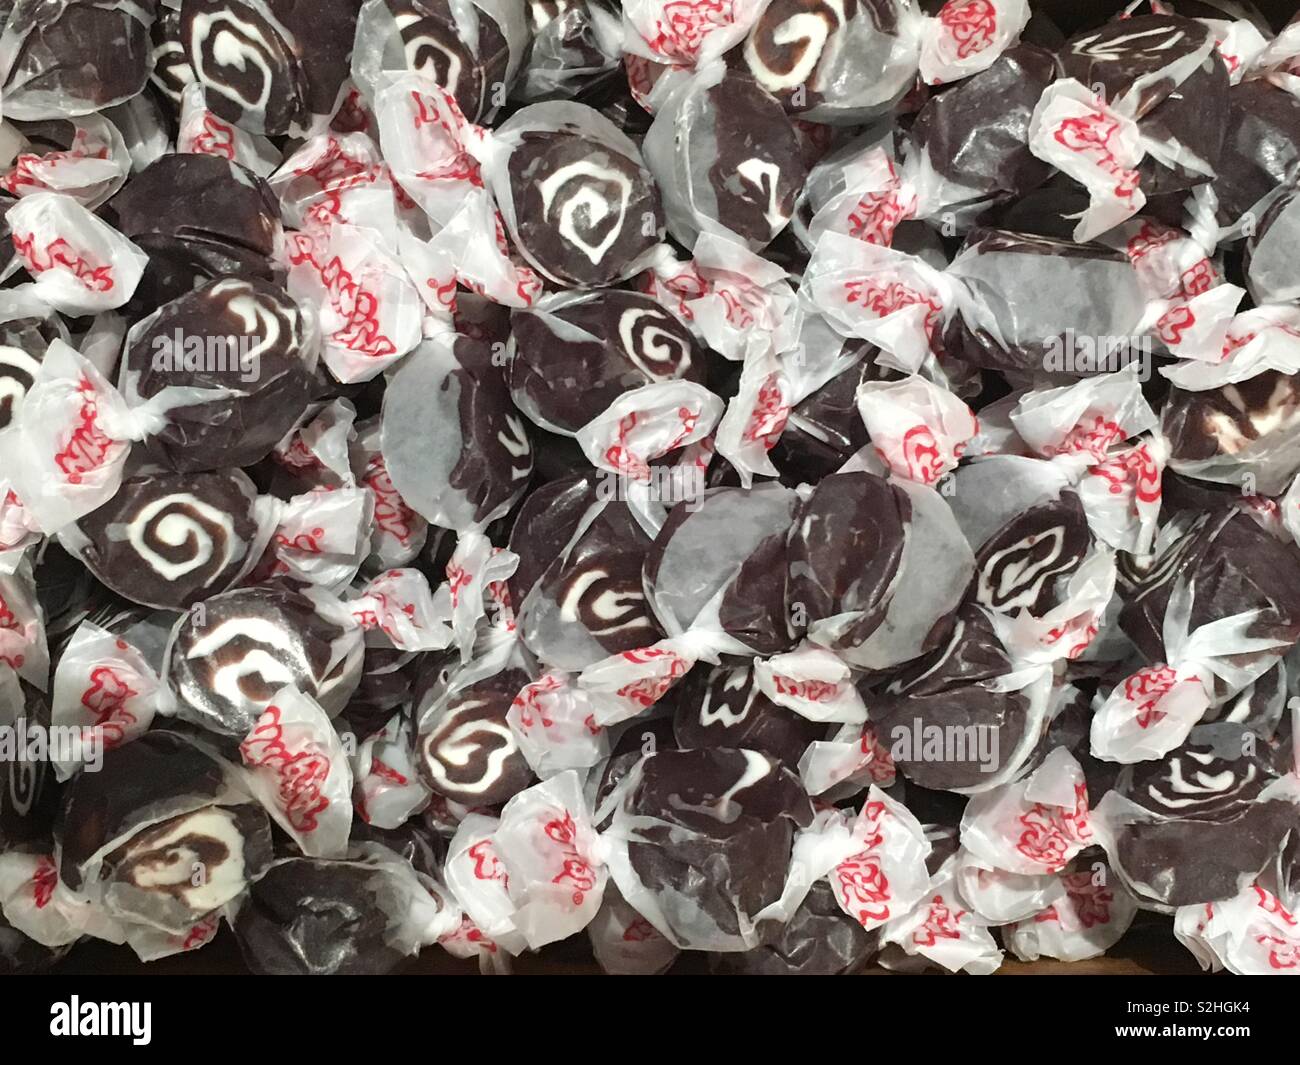 Bulk locally made taffy candy piled high in a basket. Stock Photo